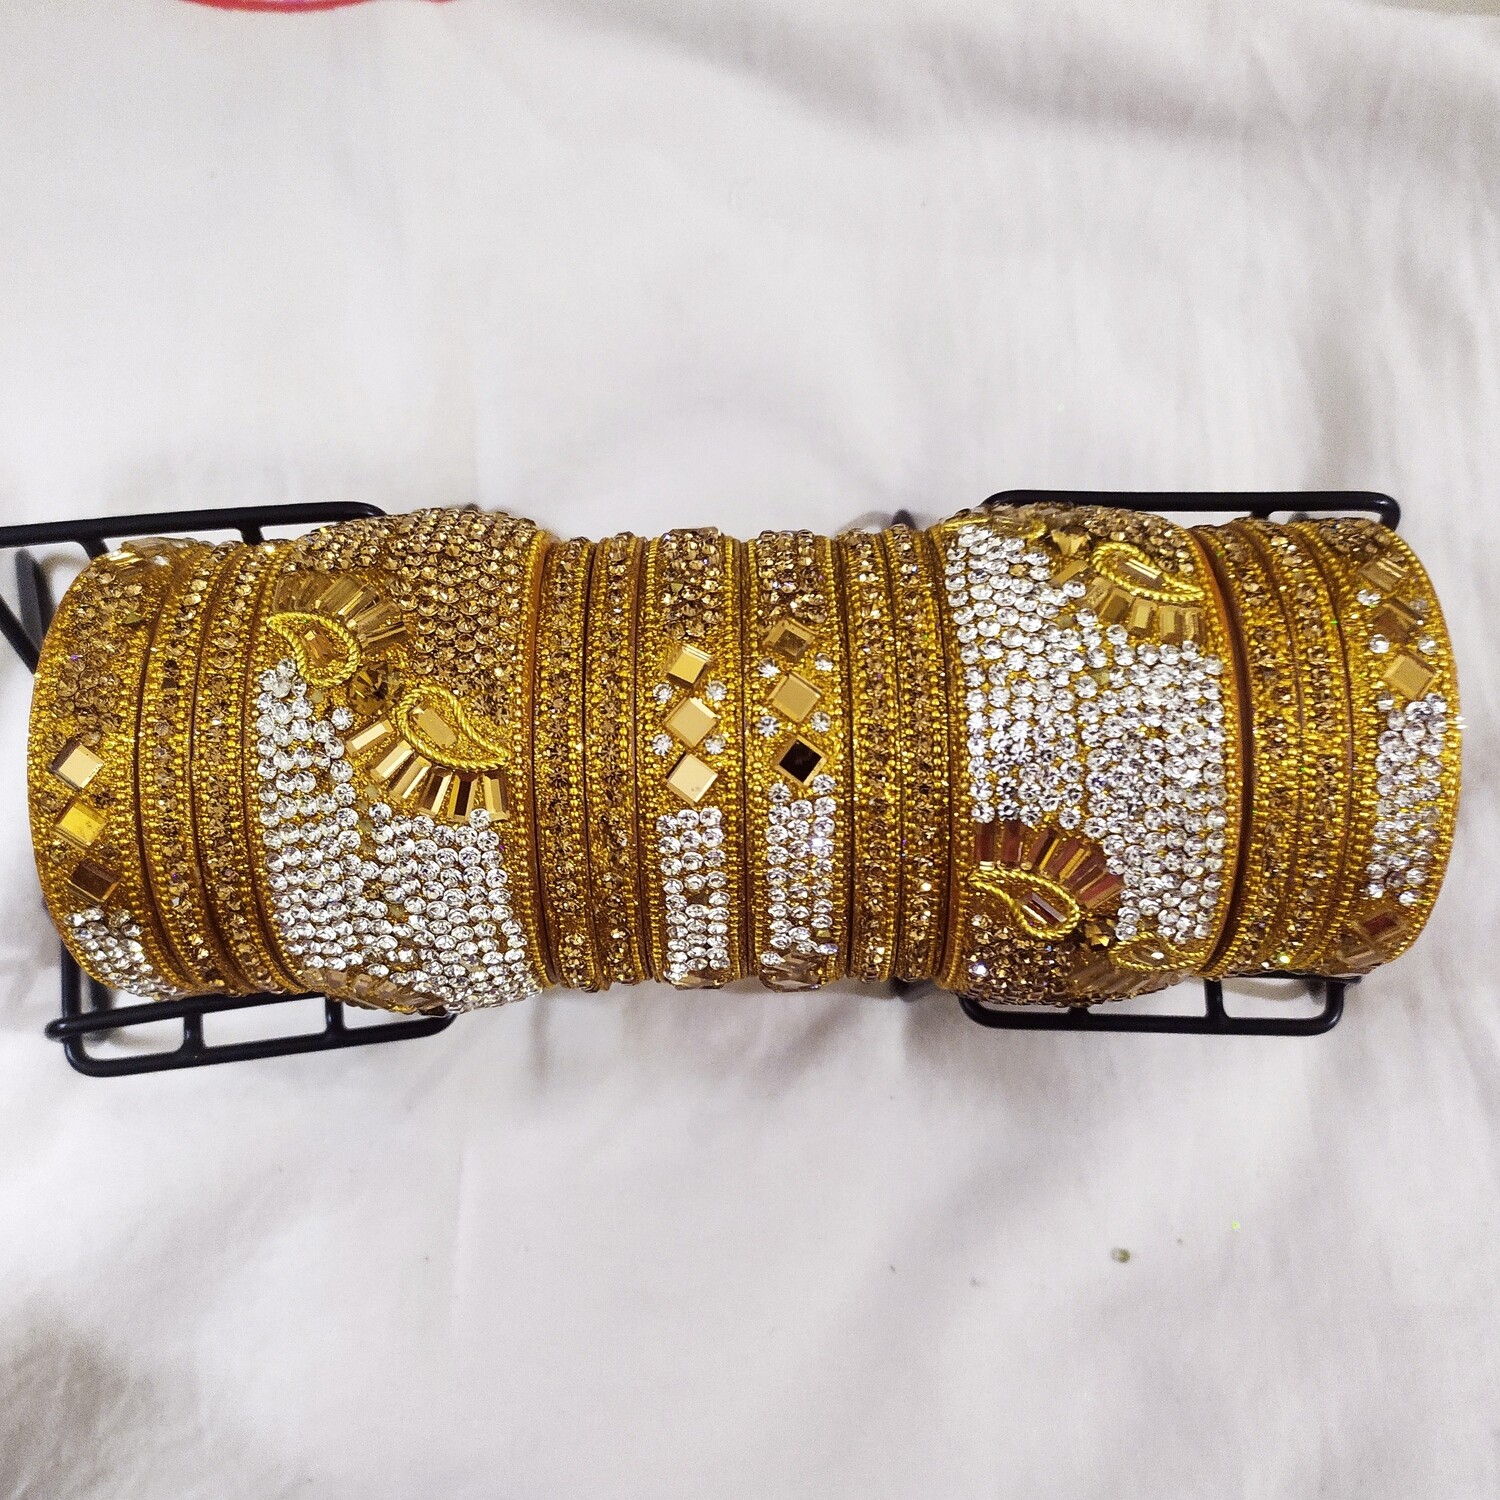 Gold Bangles with silver stones set size: 2-6